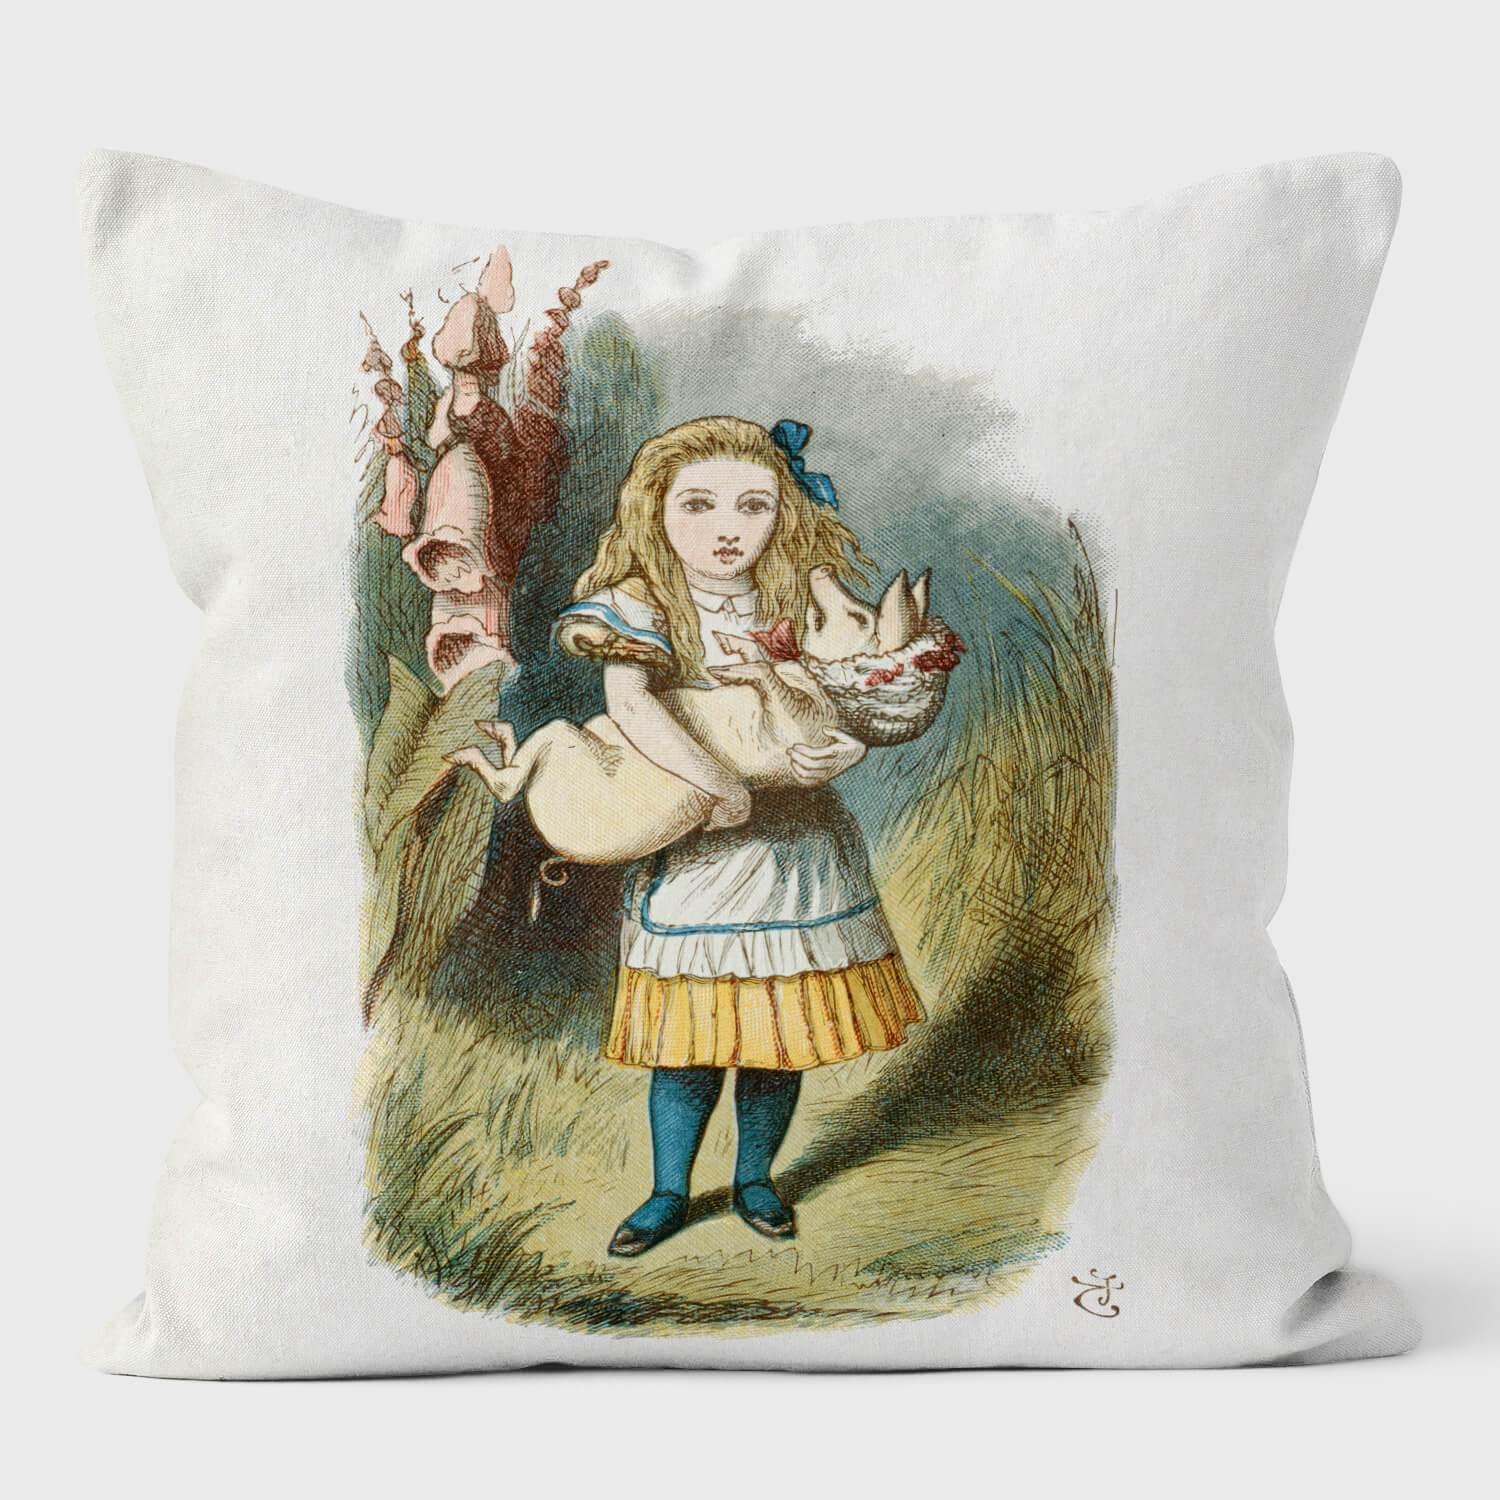 Alice and the Pig - Alice in Wonderland - Lewis Carroll Cushion - Handmade Cushions UK - WeLoveCushions